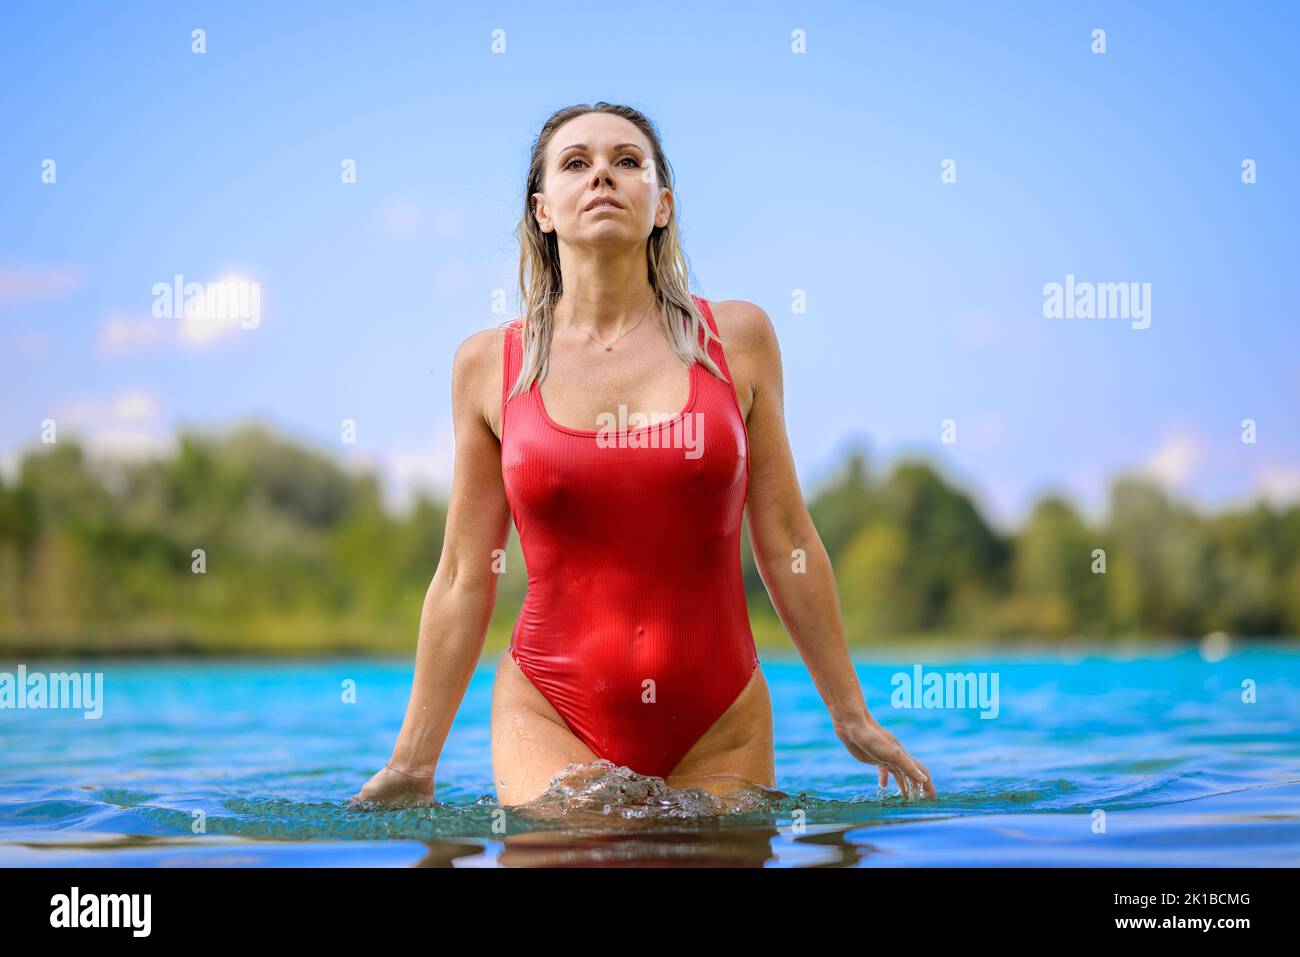 Gorgeous attractive blond woman with wet hair in a red swimsuit is slowly rising out of the water with a sensual look Stock Photo